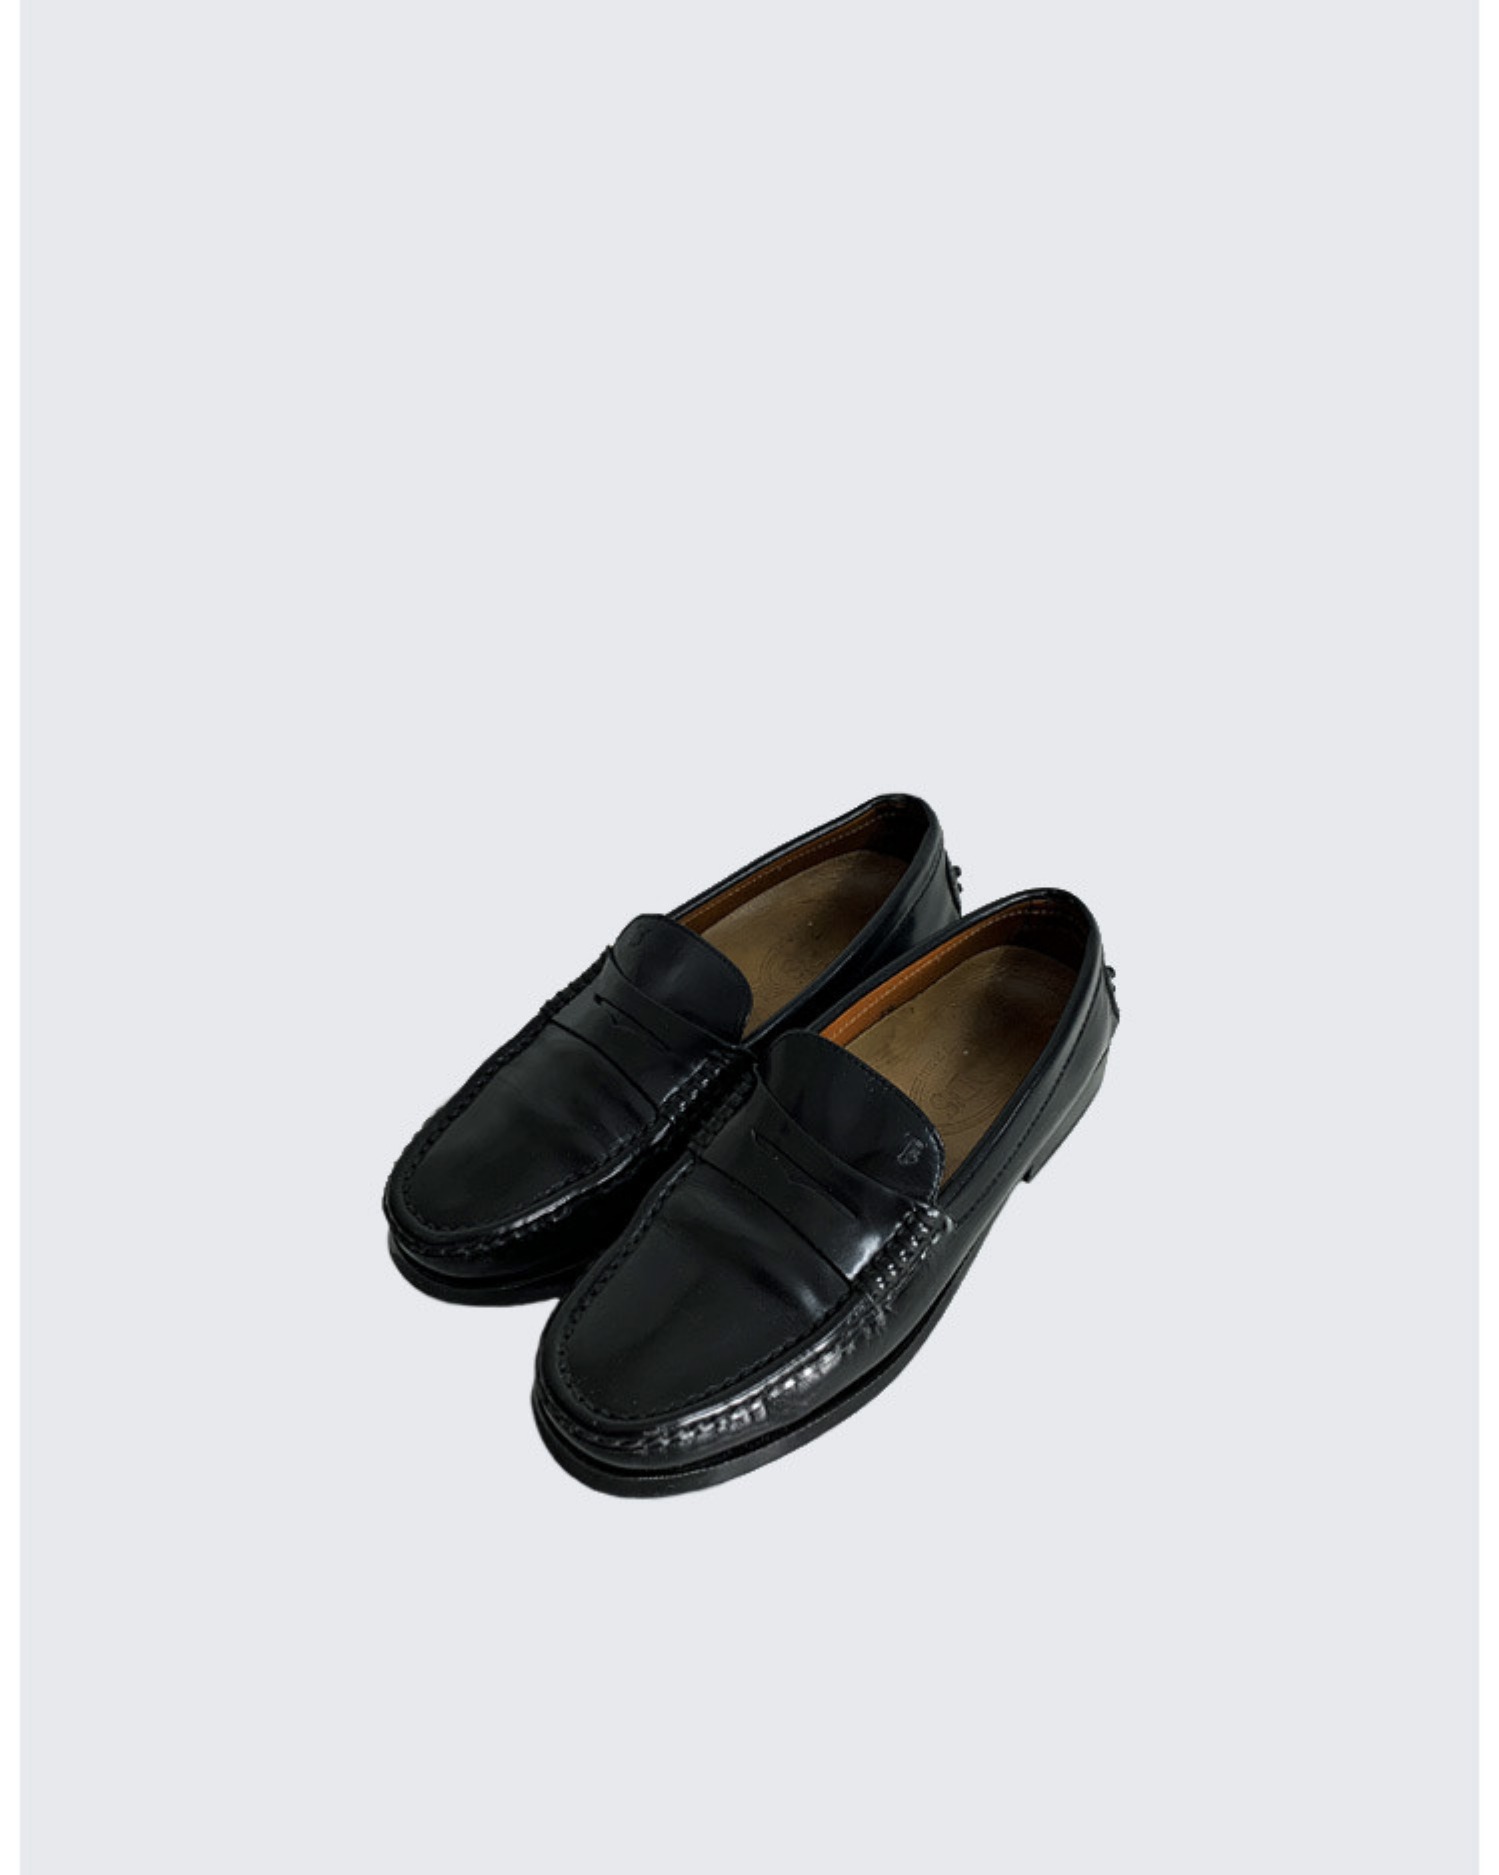 LEATHER PENNY LOAFER (245-250)